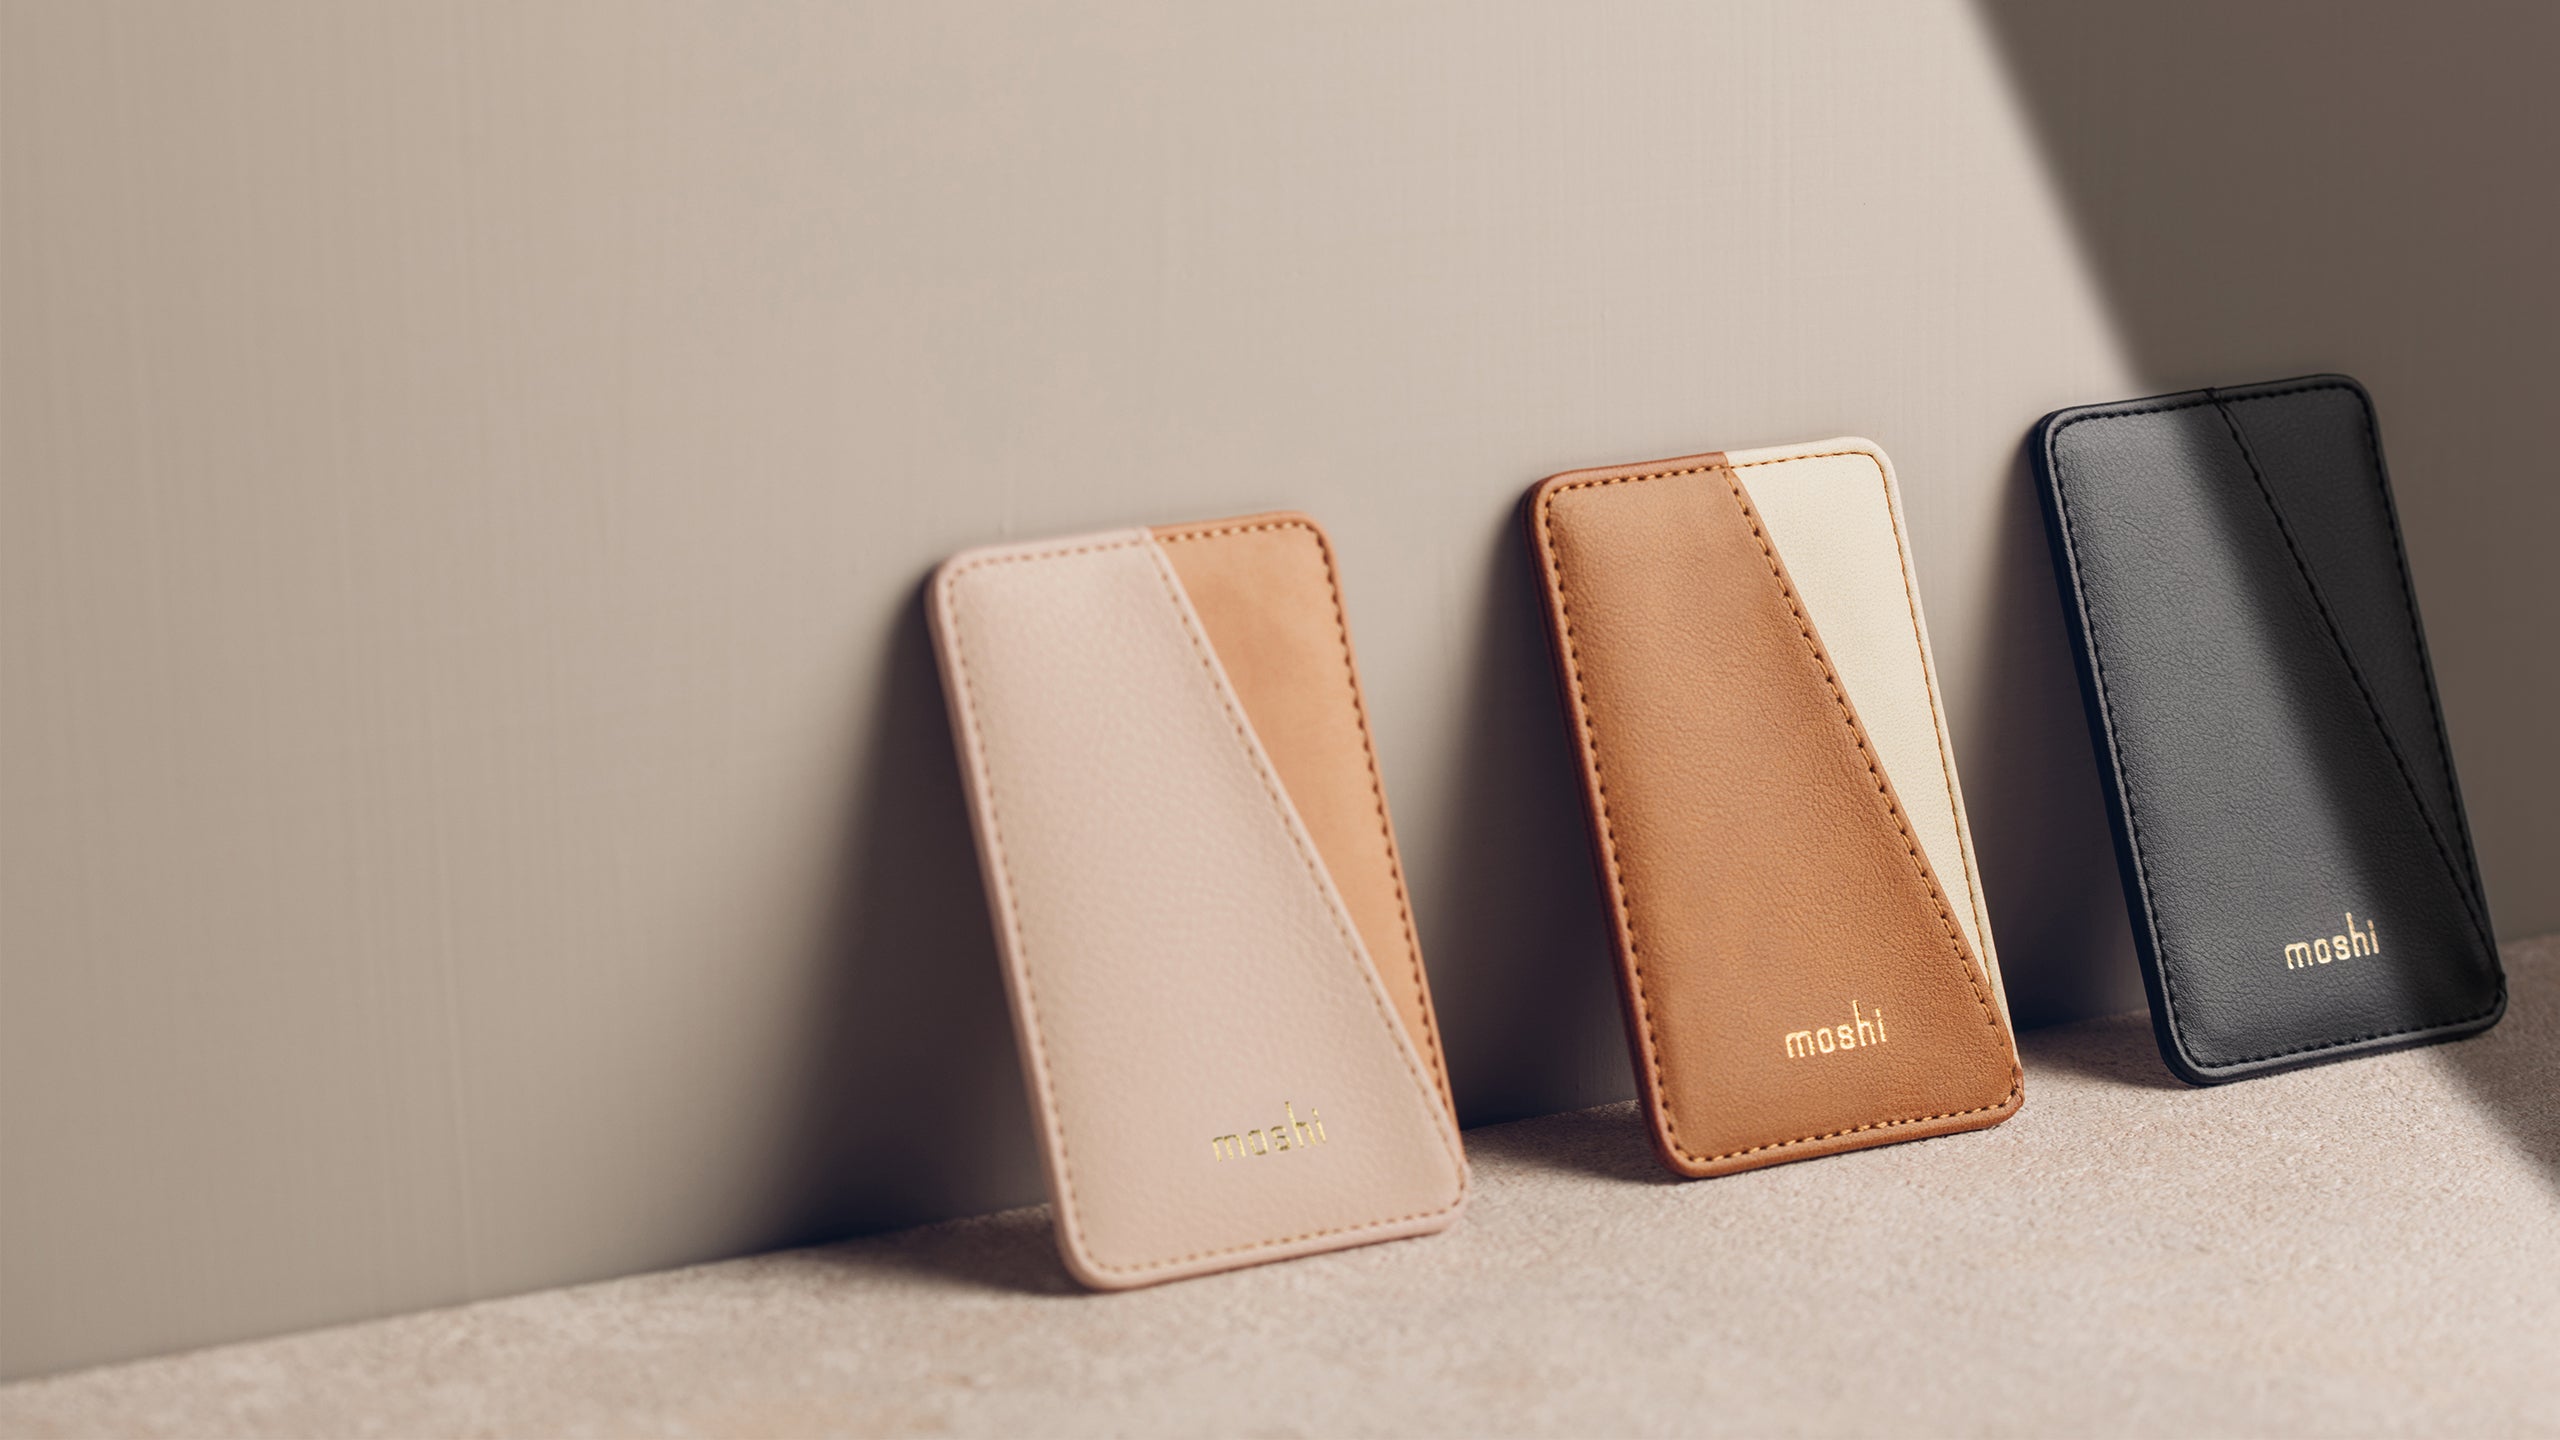 Chloé Walden Small Leather Phone Pouch (Technology)